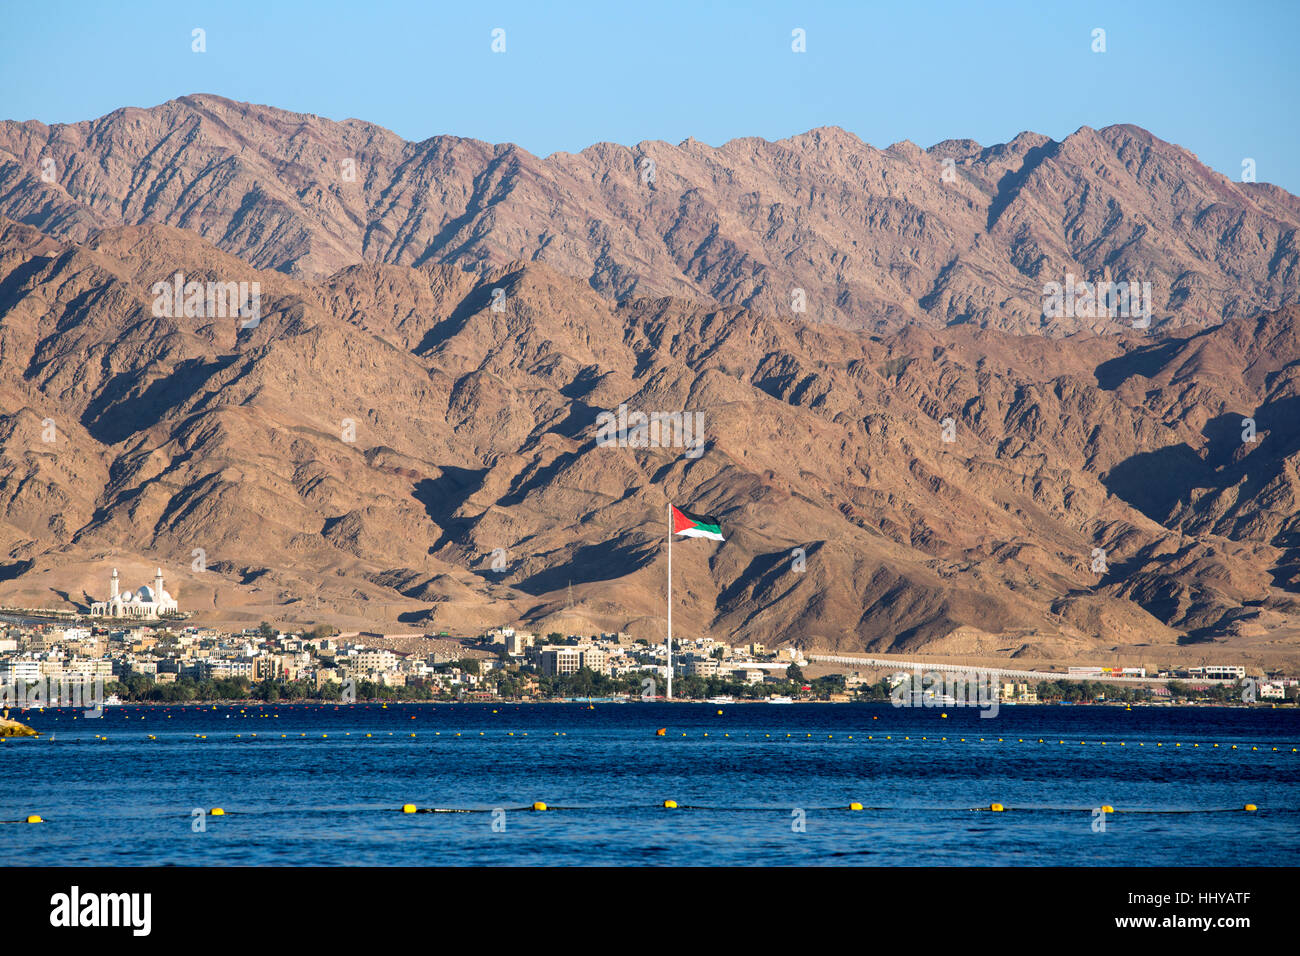 View to the red mountains of Jordan from Eilat, Israel Stock Photo - Alamy